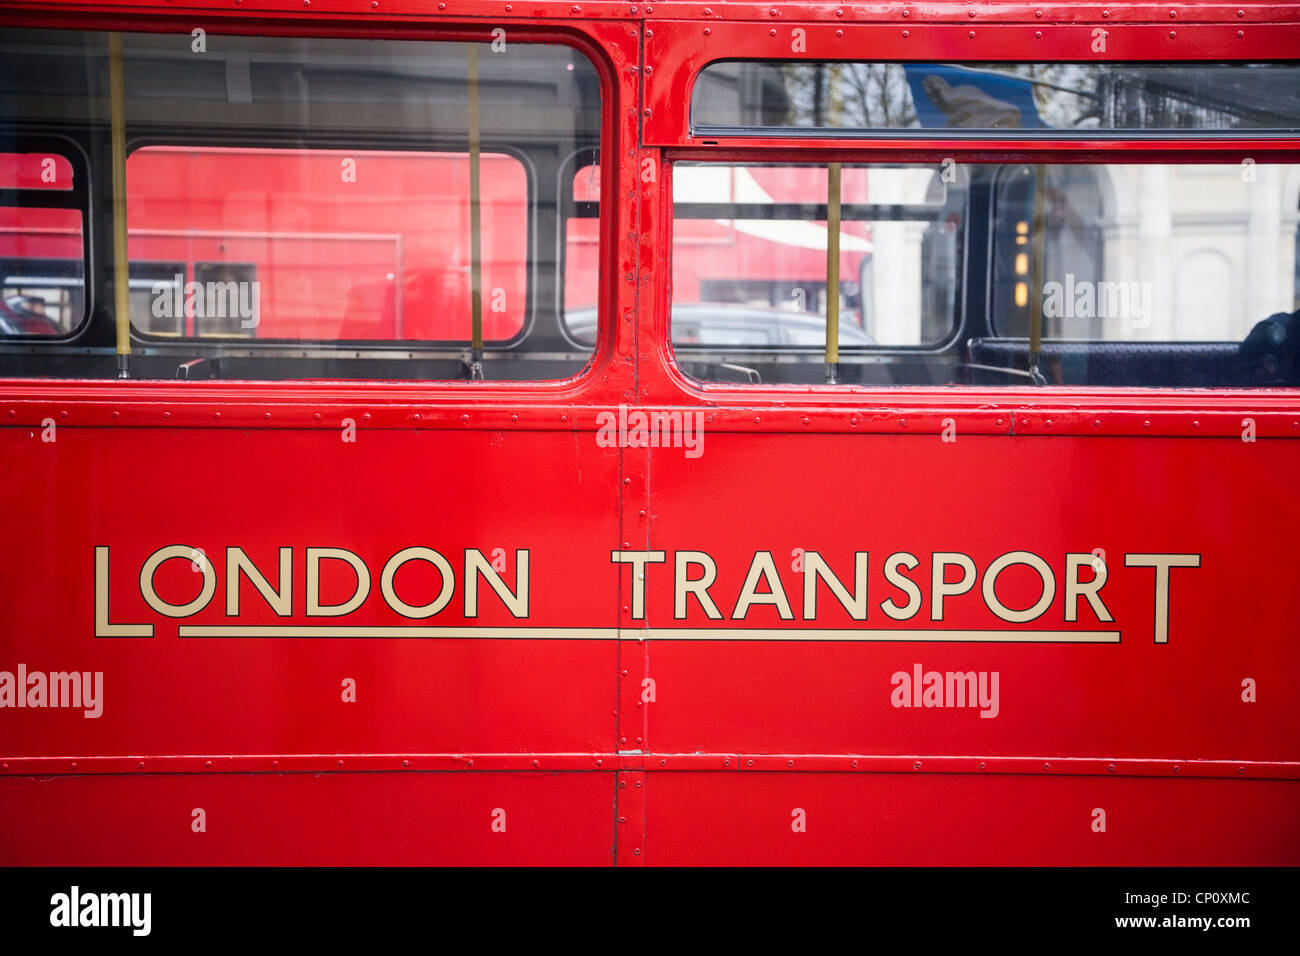 London Transport sign on the side of an old Routemaster London bus, England. Stock Photo